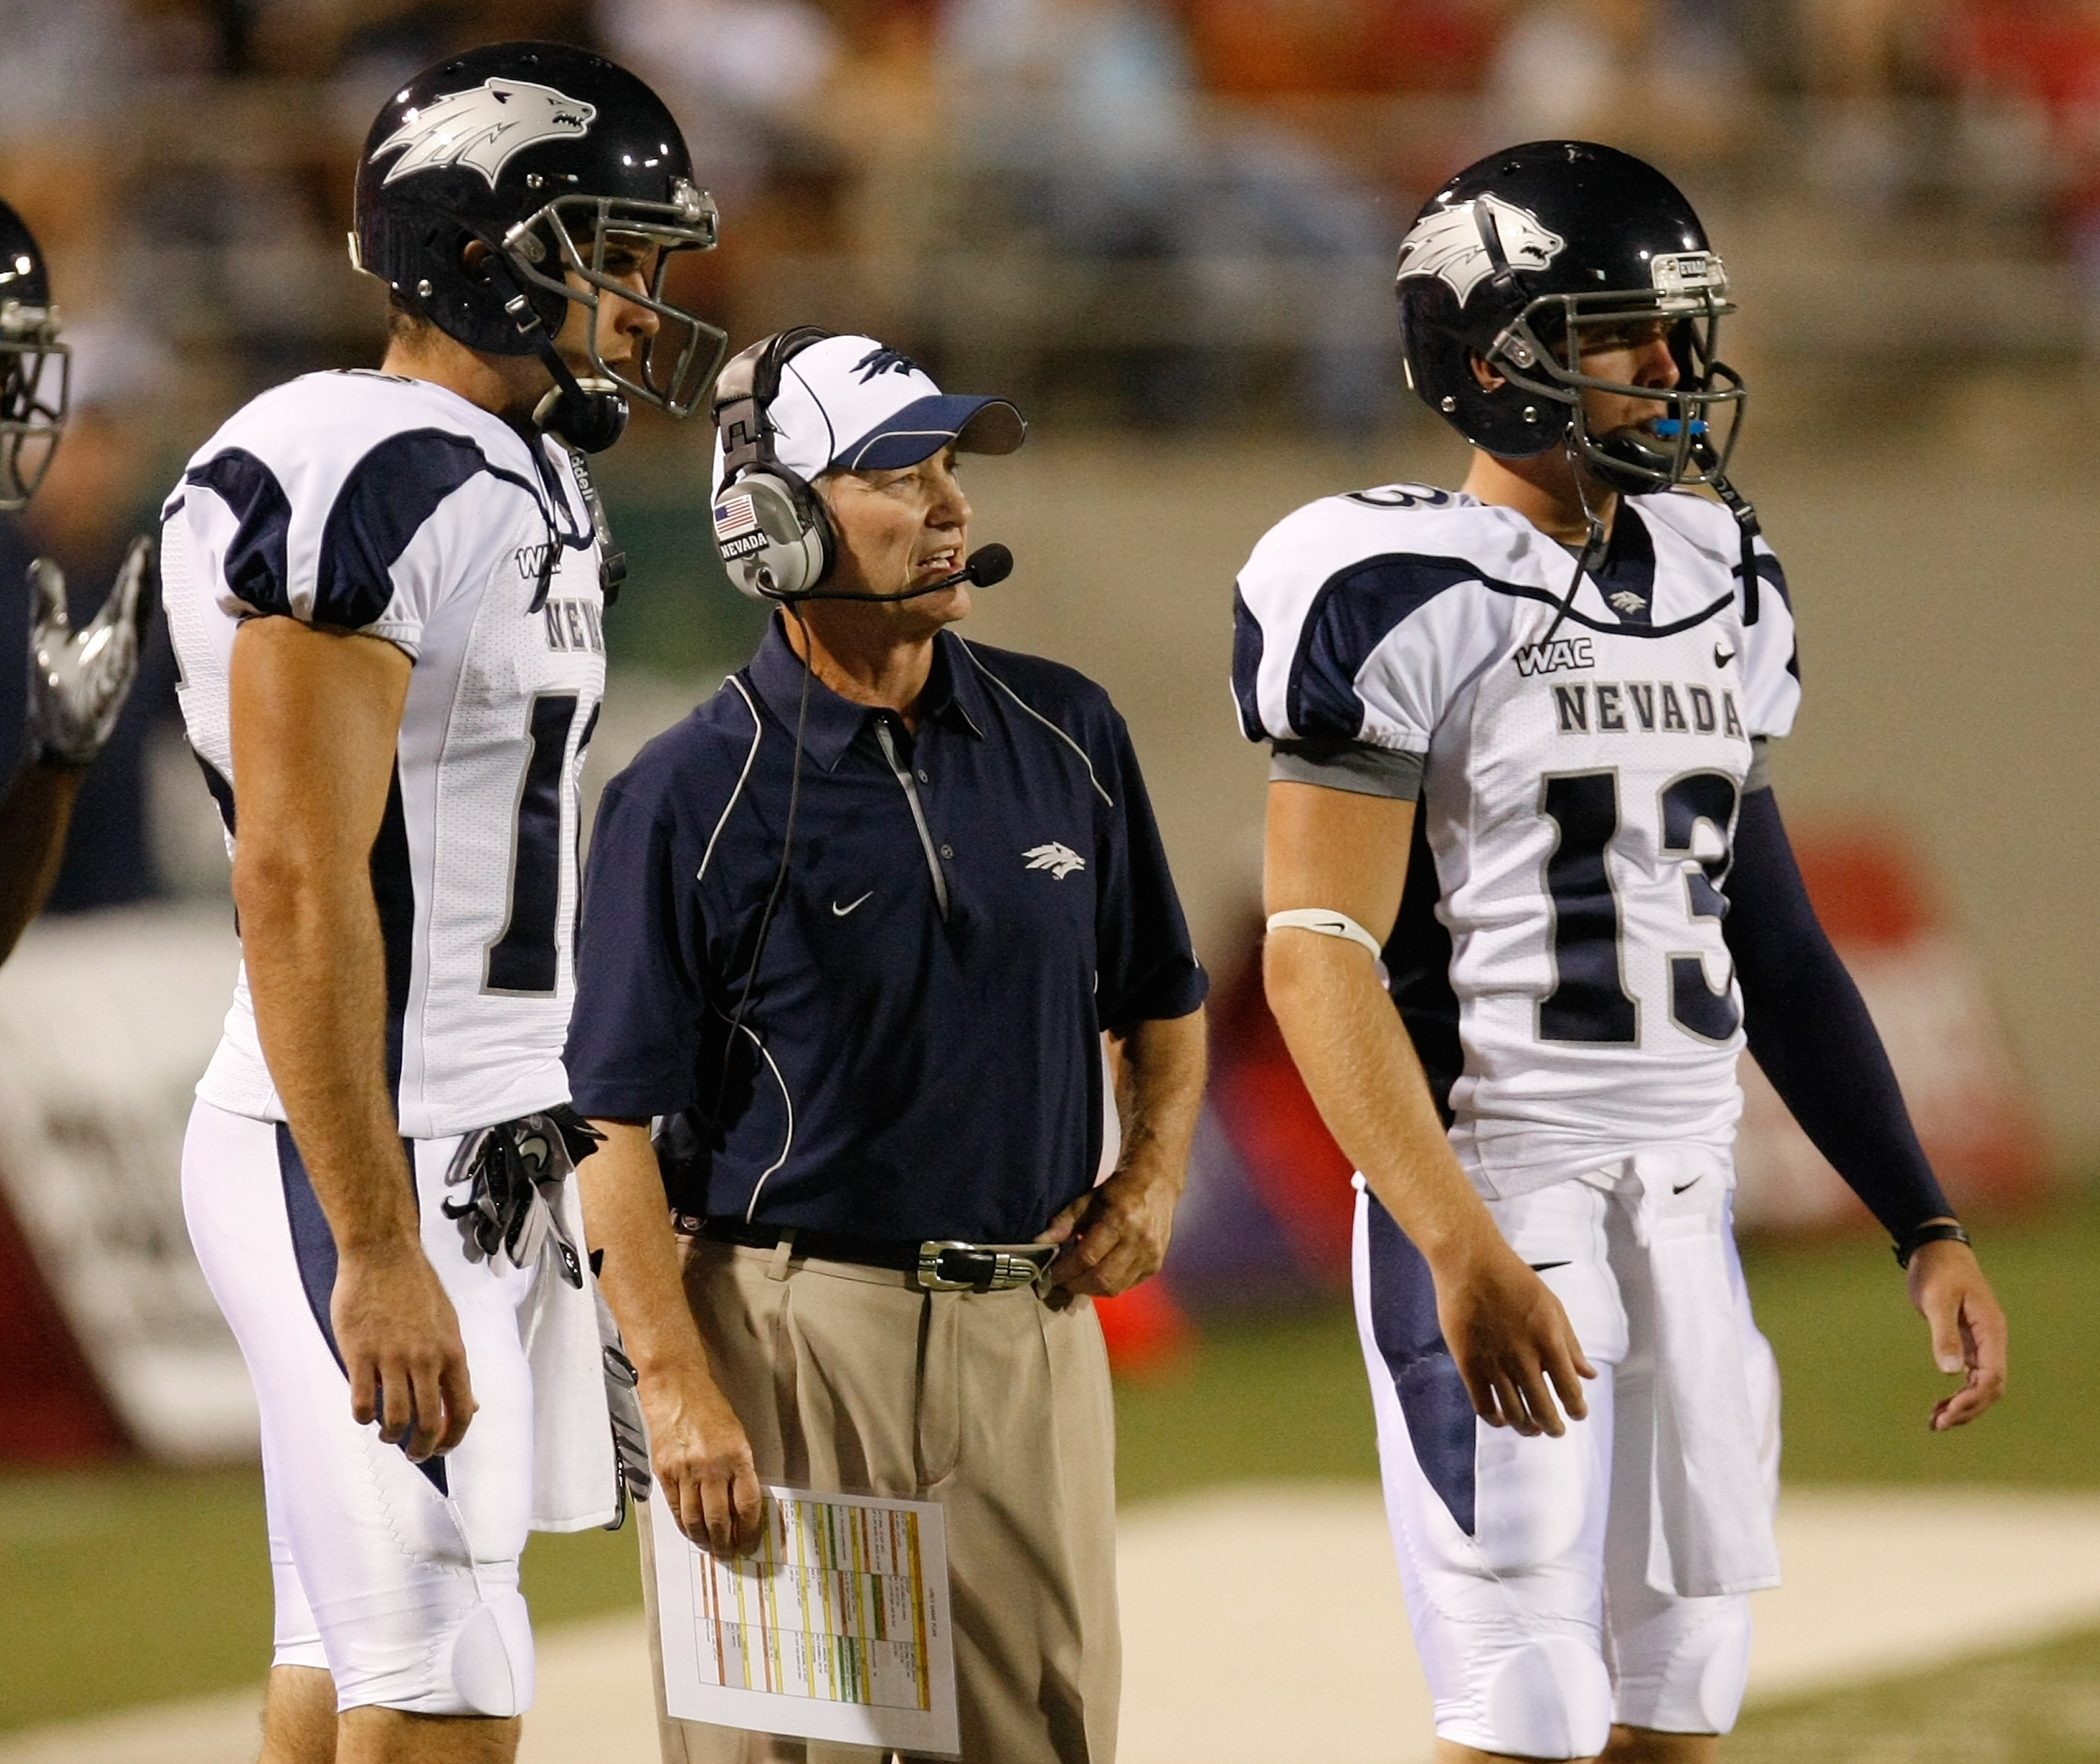 LAS VEGAS - OCTOBER 02:  Nevada Reno Wolf Pack head coach Chris Ault (C) is flanked by quarterbacks Tyler Lantrip #16 and Mason Magleby #13 as Ault watches his players take on the UNLV Rebels at Sam Boyd Stadium October 2, 2010 in Las Vegas, Nevada. Nevad